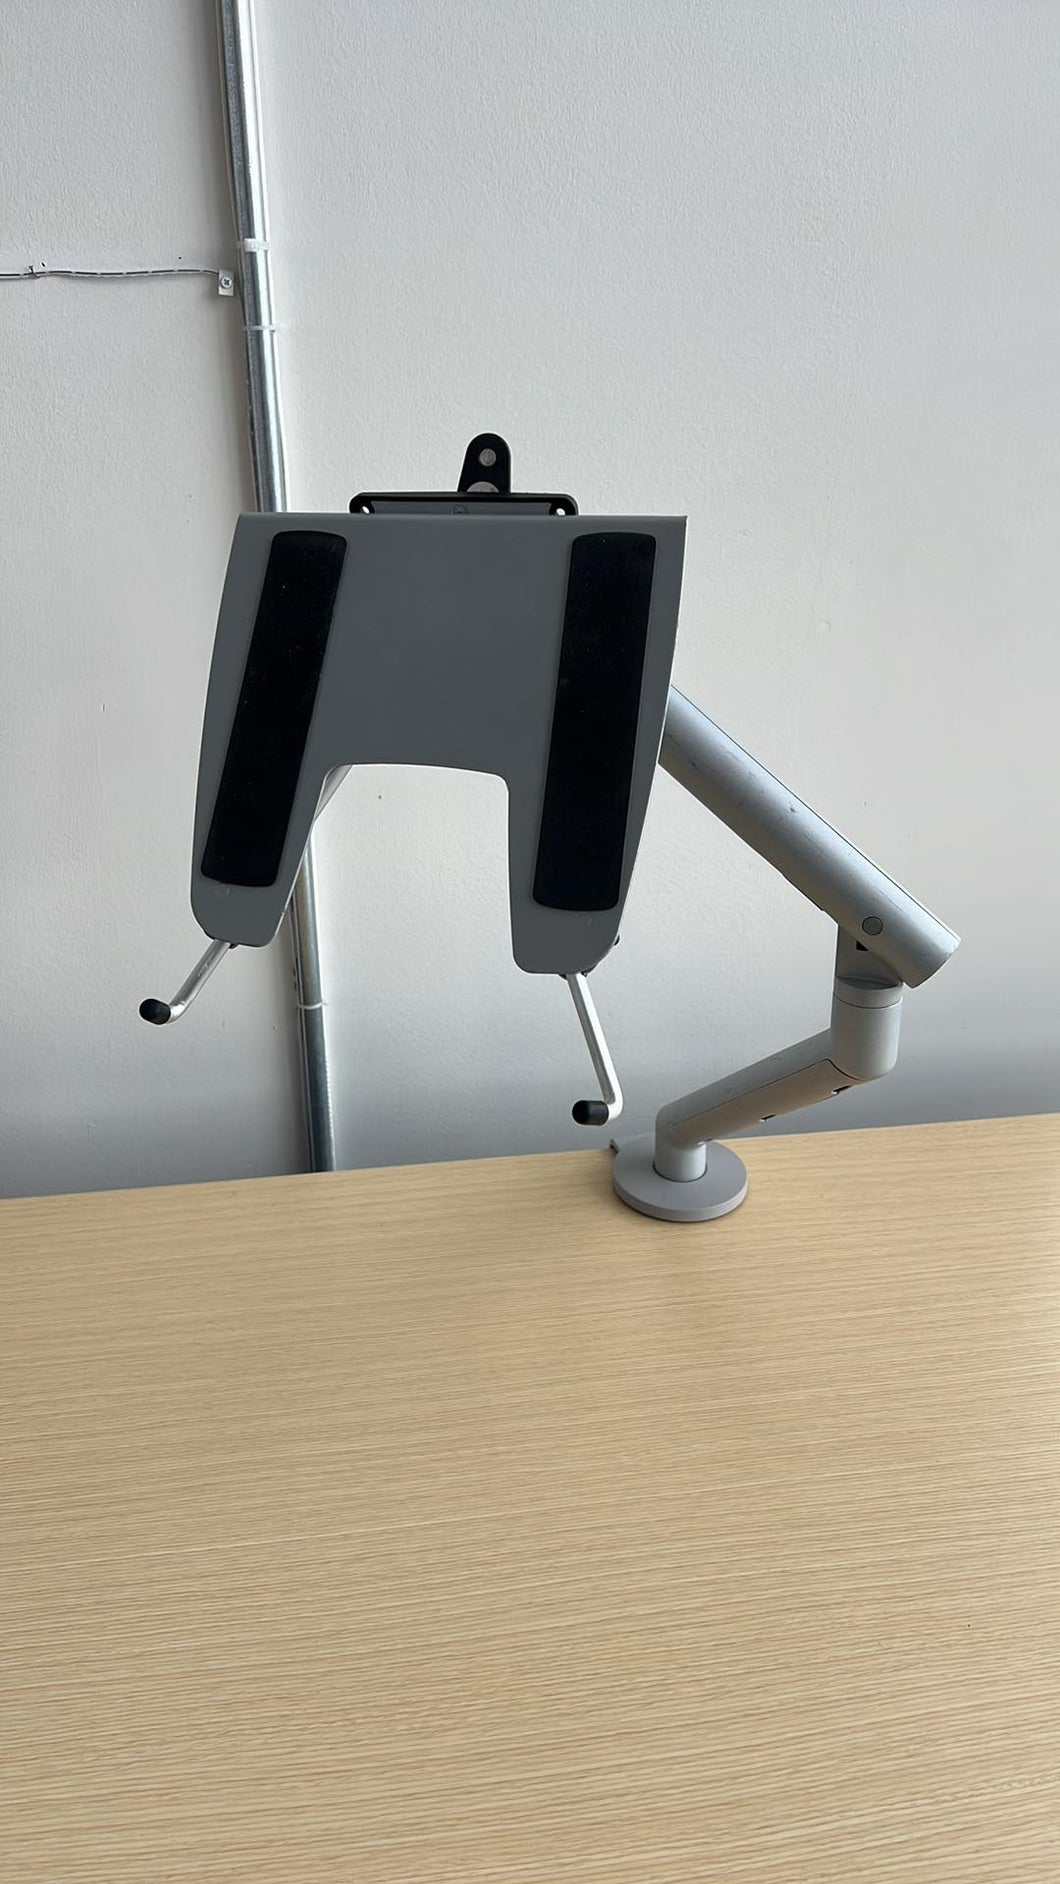 Used Herman Miller Flo Monitor Arm w/ Tablet Stand